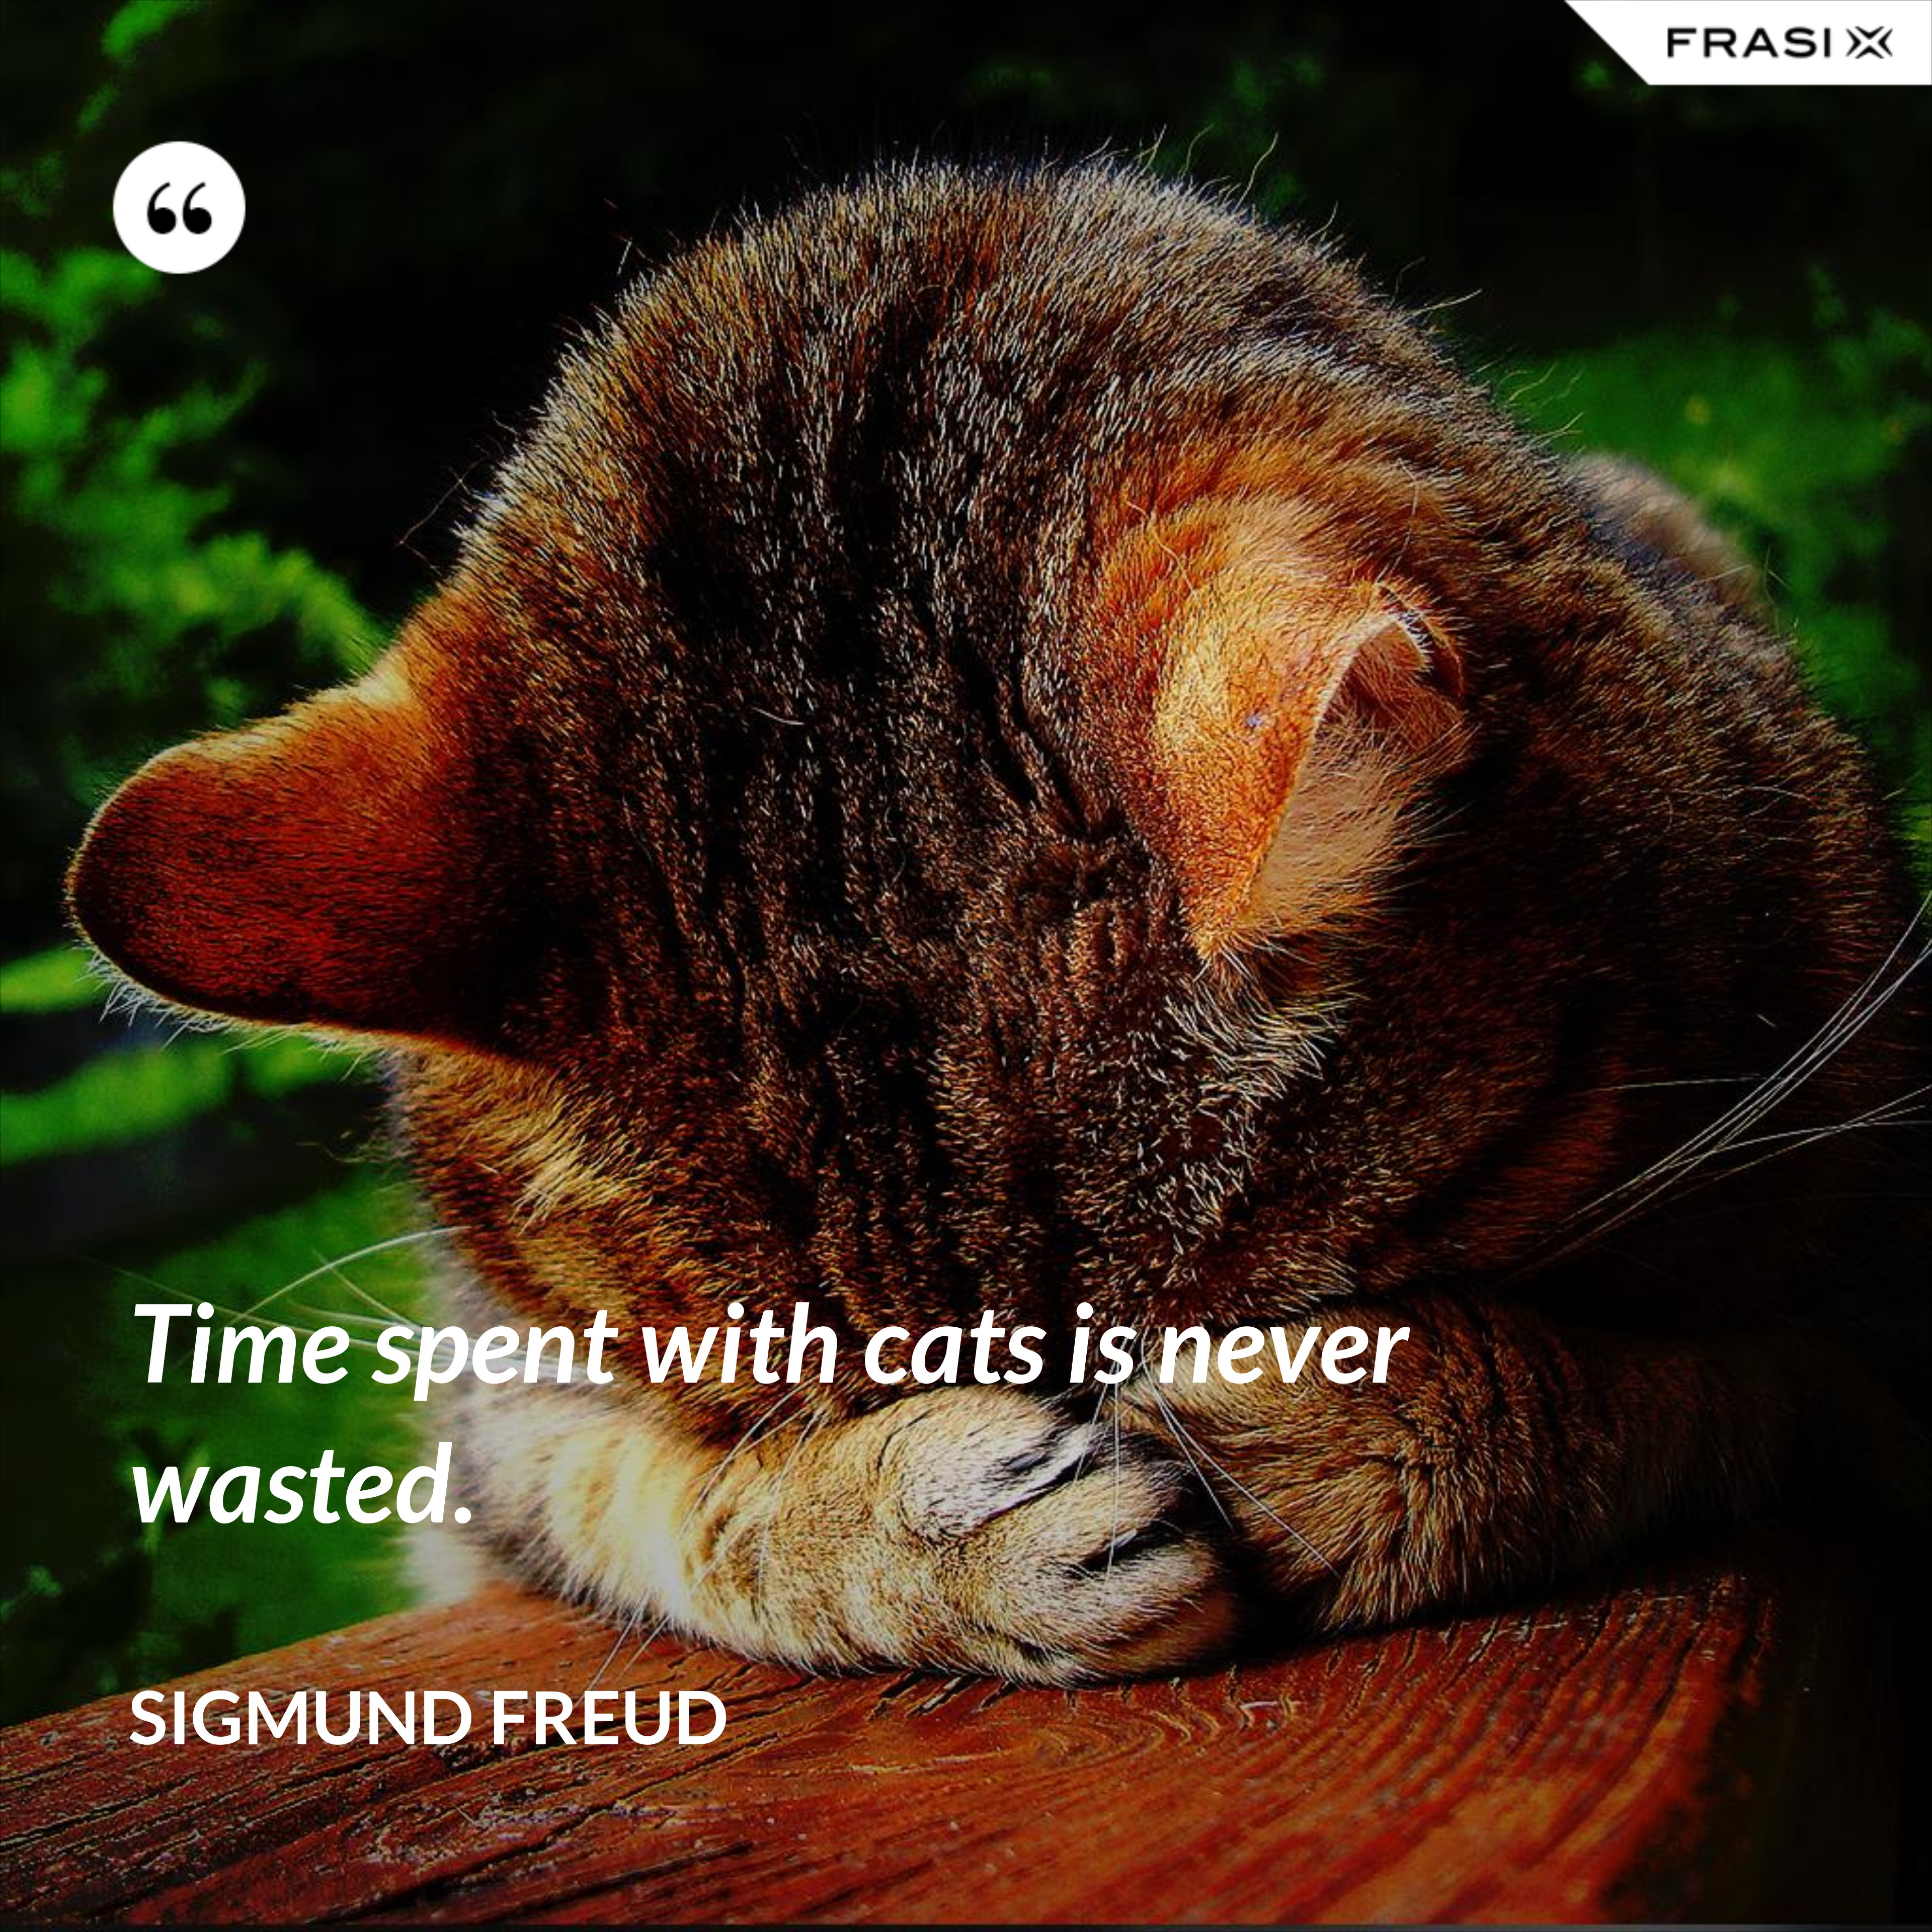 Time spent with cats is never wasted. - Sigmund Freud